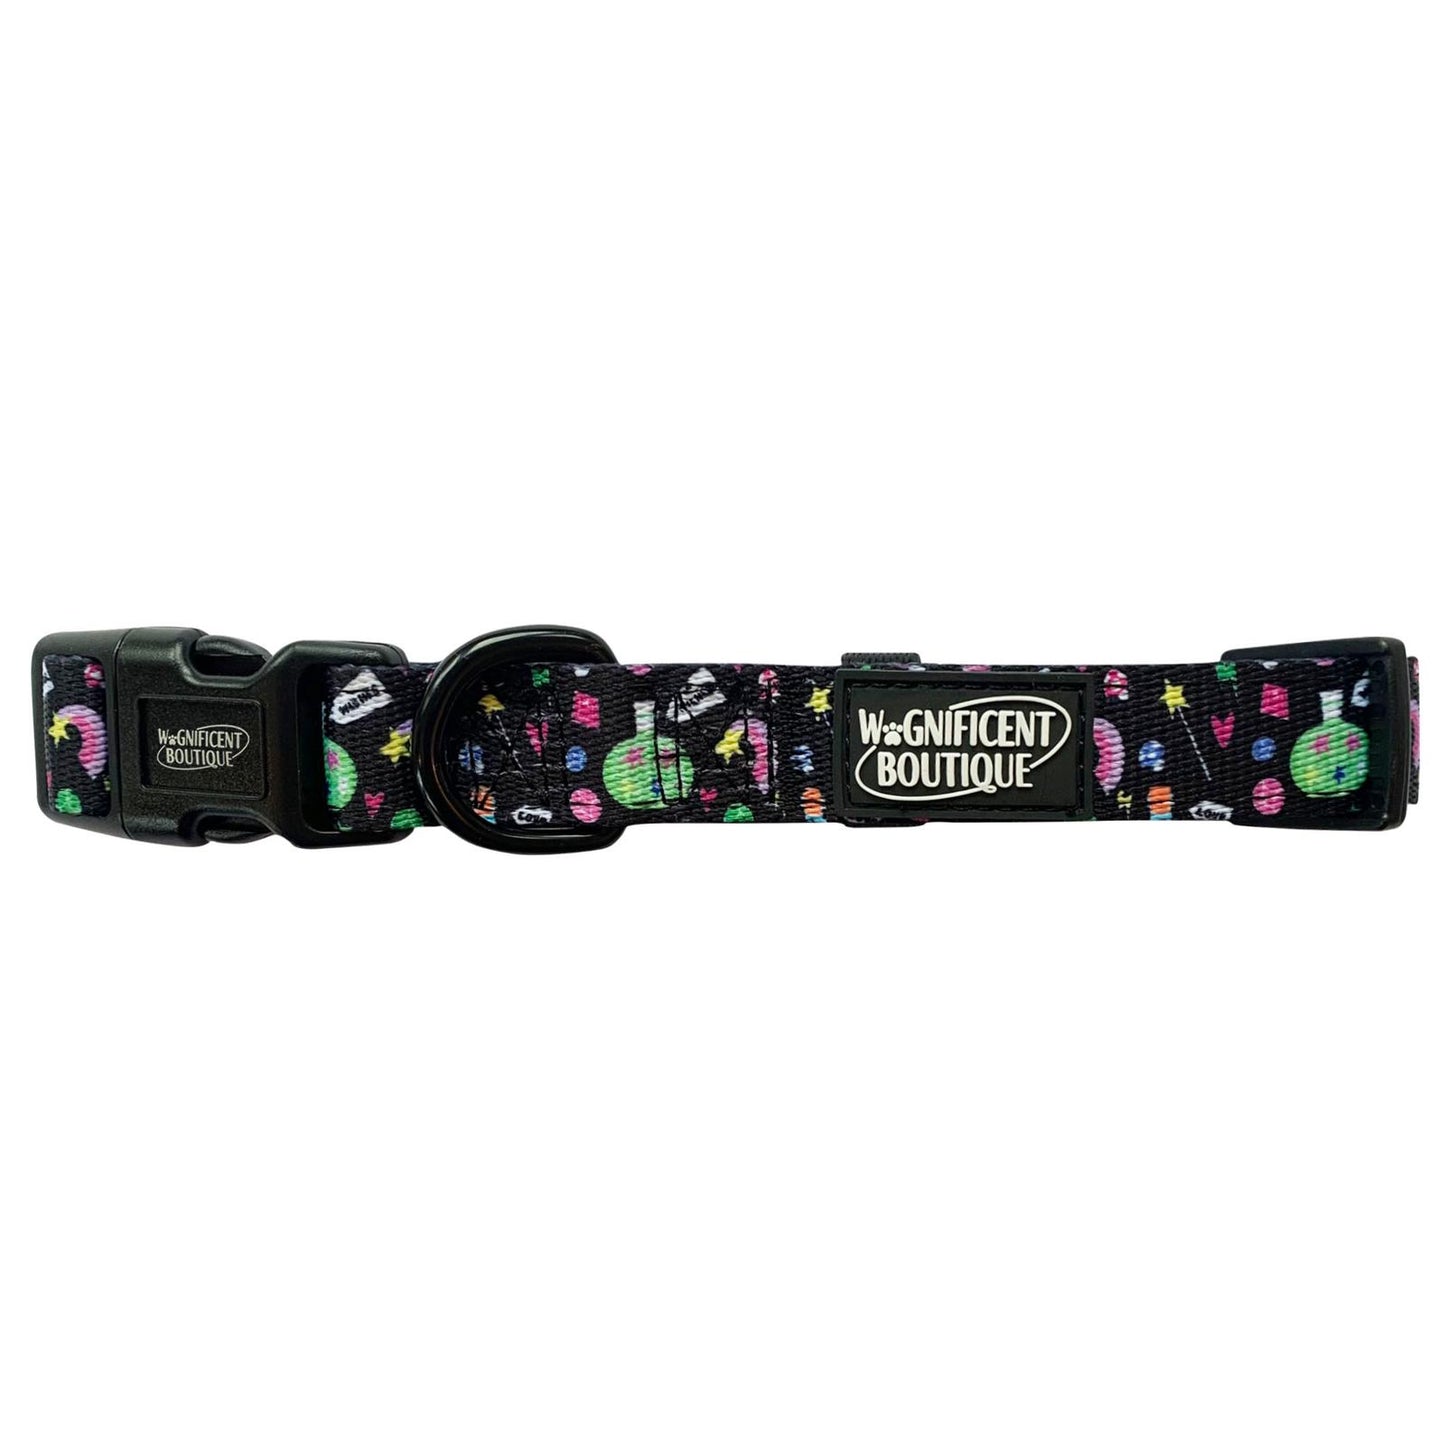 Black Magic Collar - Unique Collar | Wagnificent Boutique: Stylish Harnesses, Collars, Leads, and Matching Poo Bag Holders